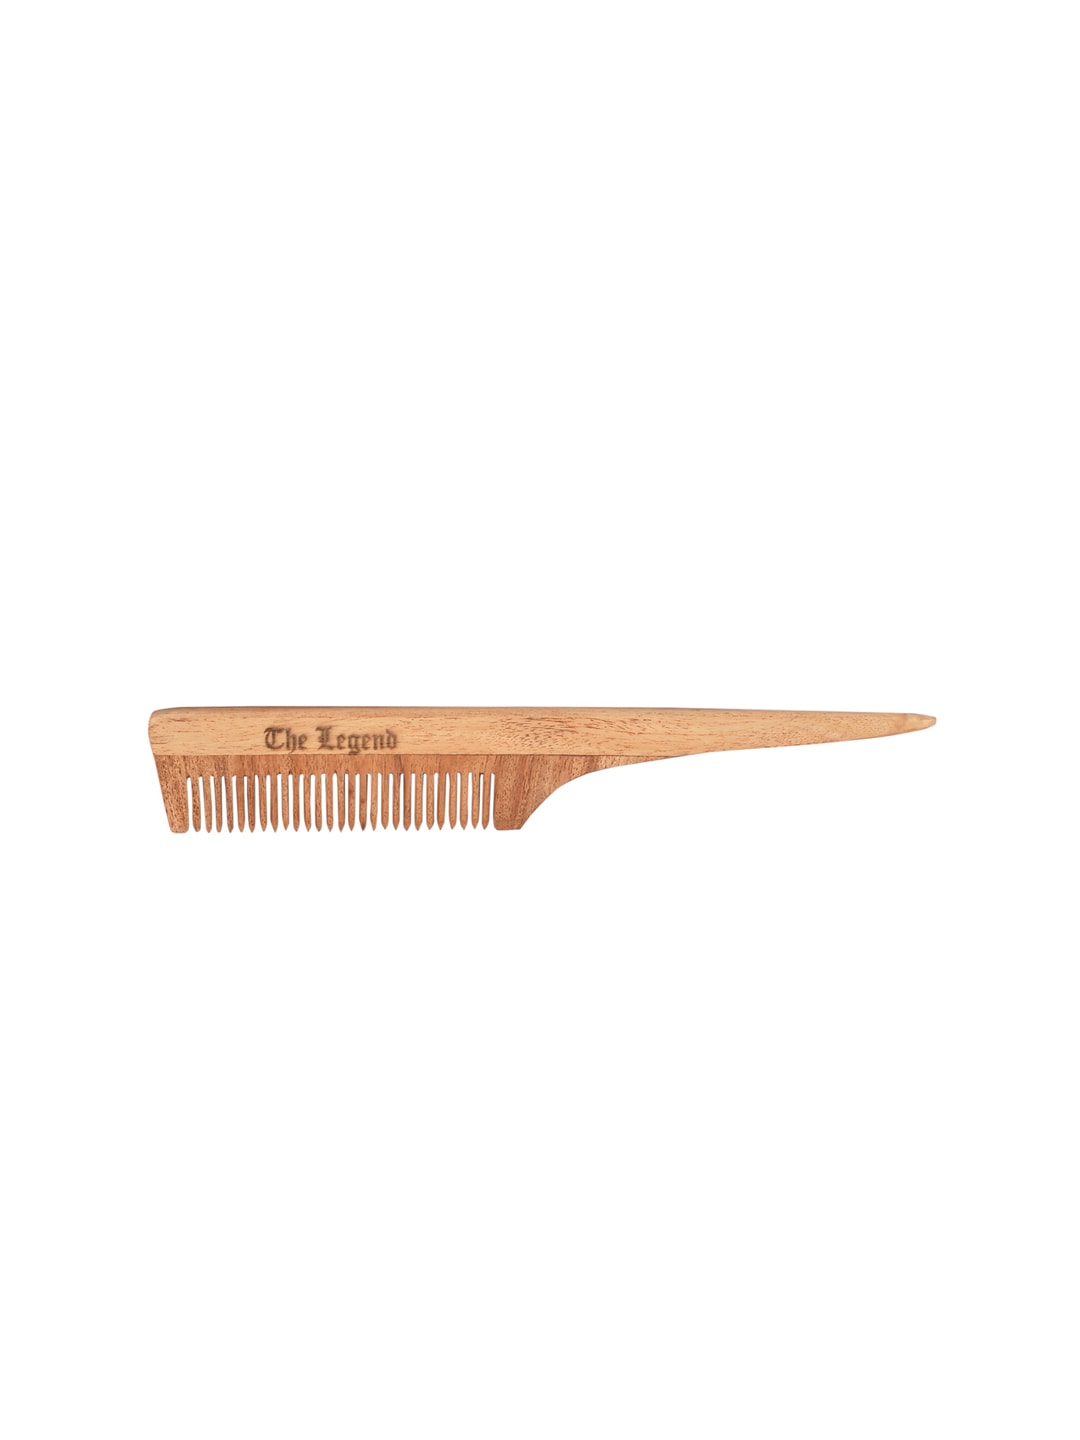 The Legend Organic Neem Wood Comb with Long Handle Price in India